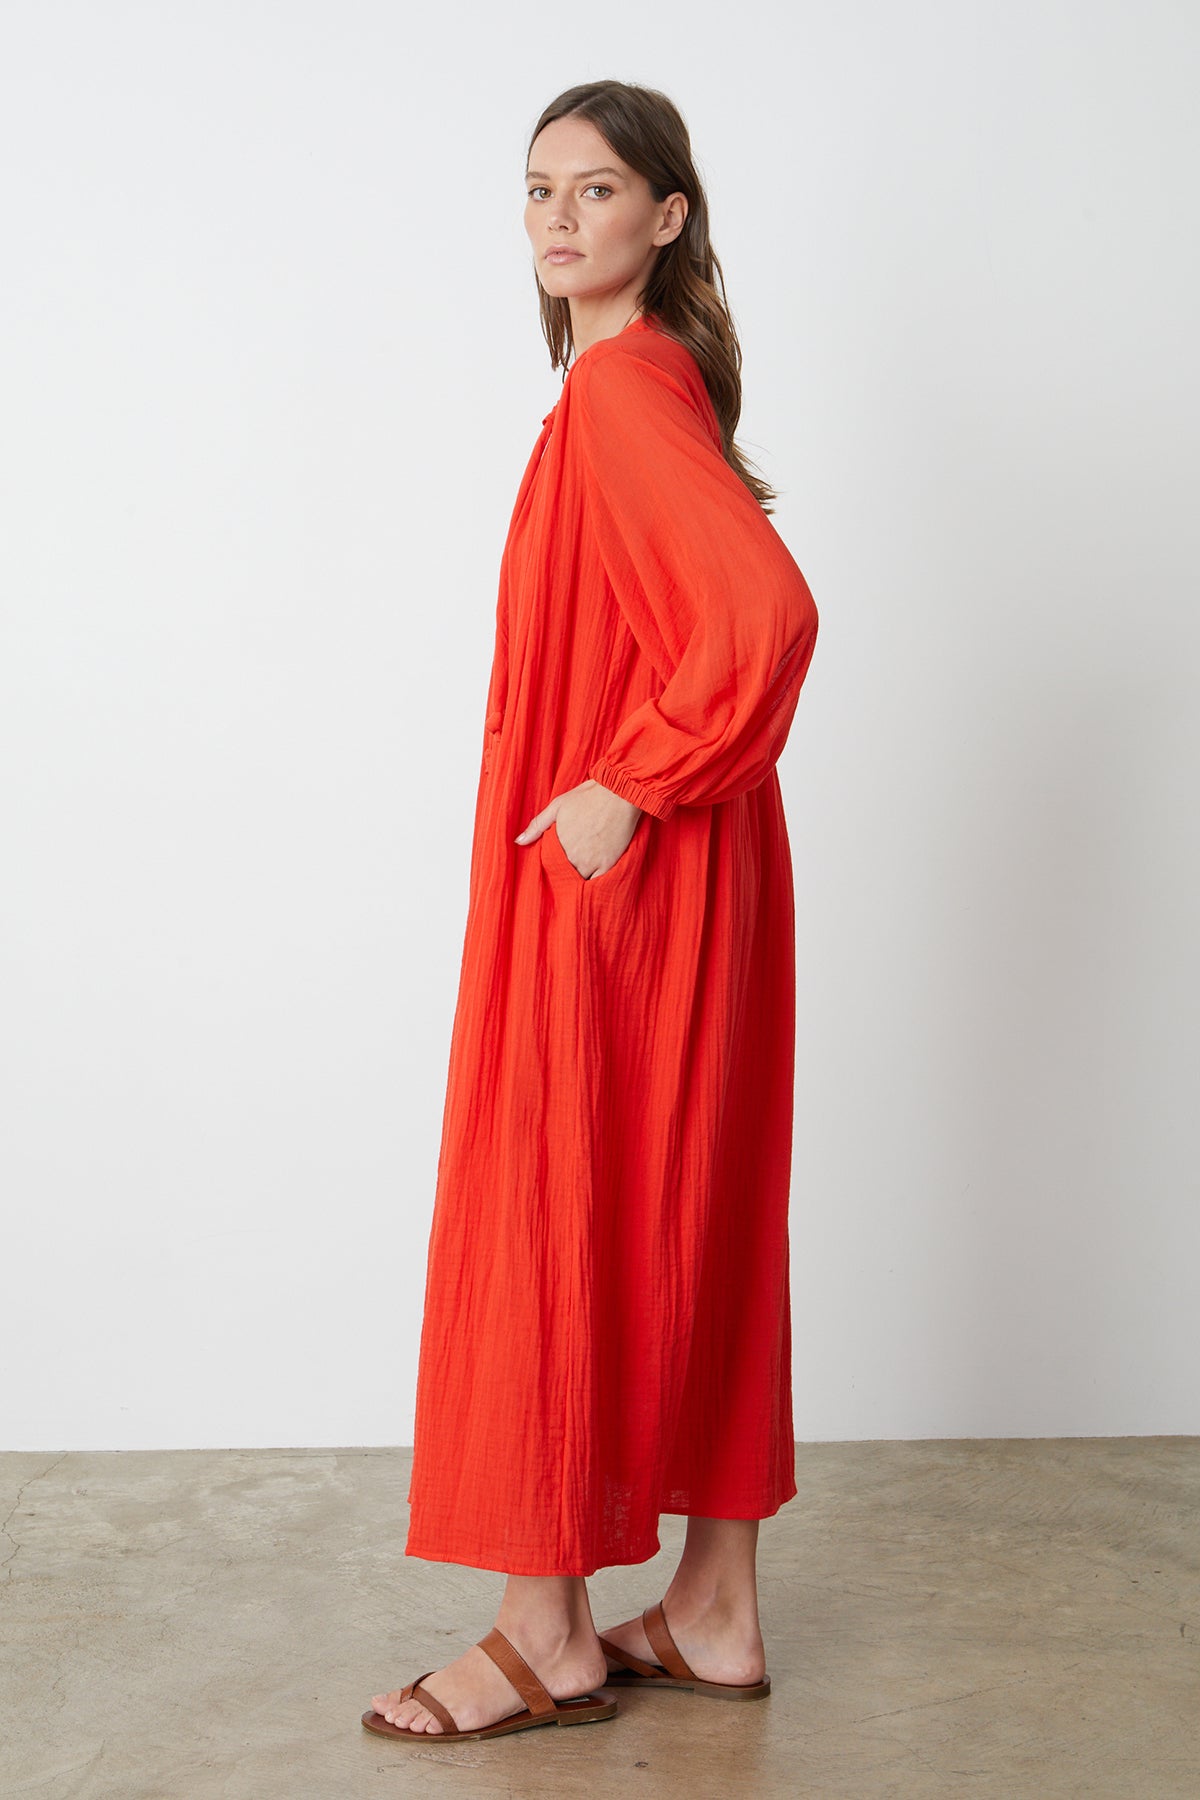 Carmella Maxi Dress in bright red cardinal color gauze model standing to the side with hand in pocket-26255708356801